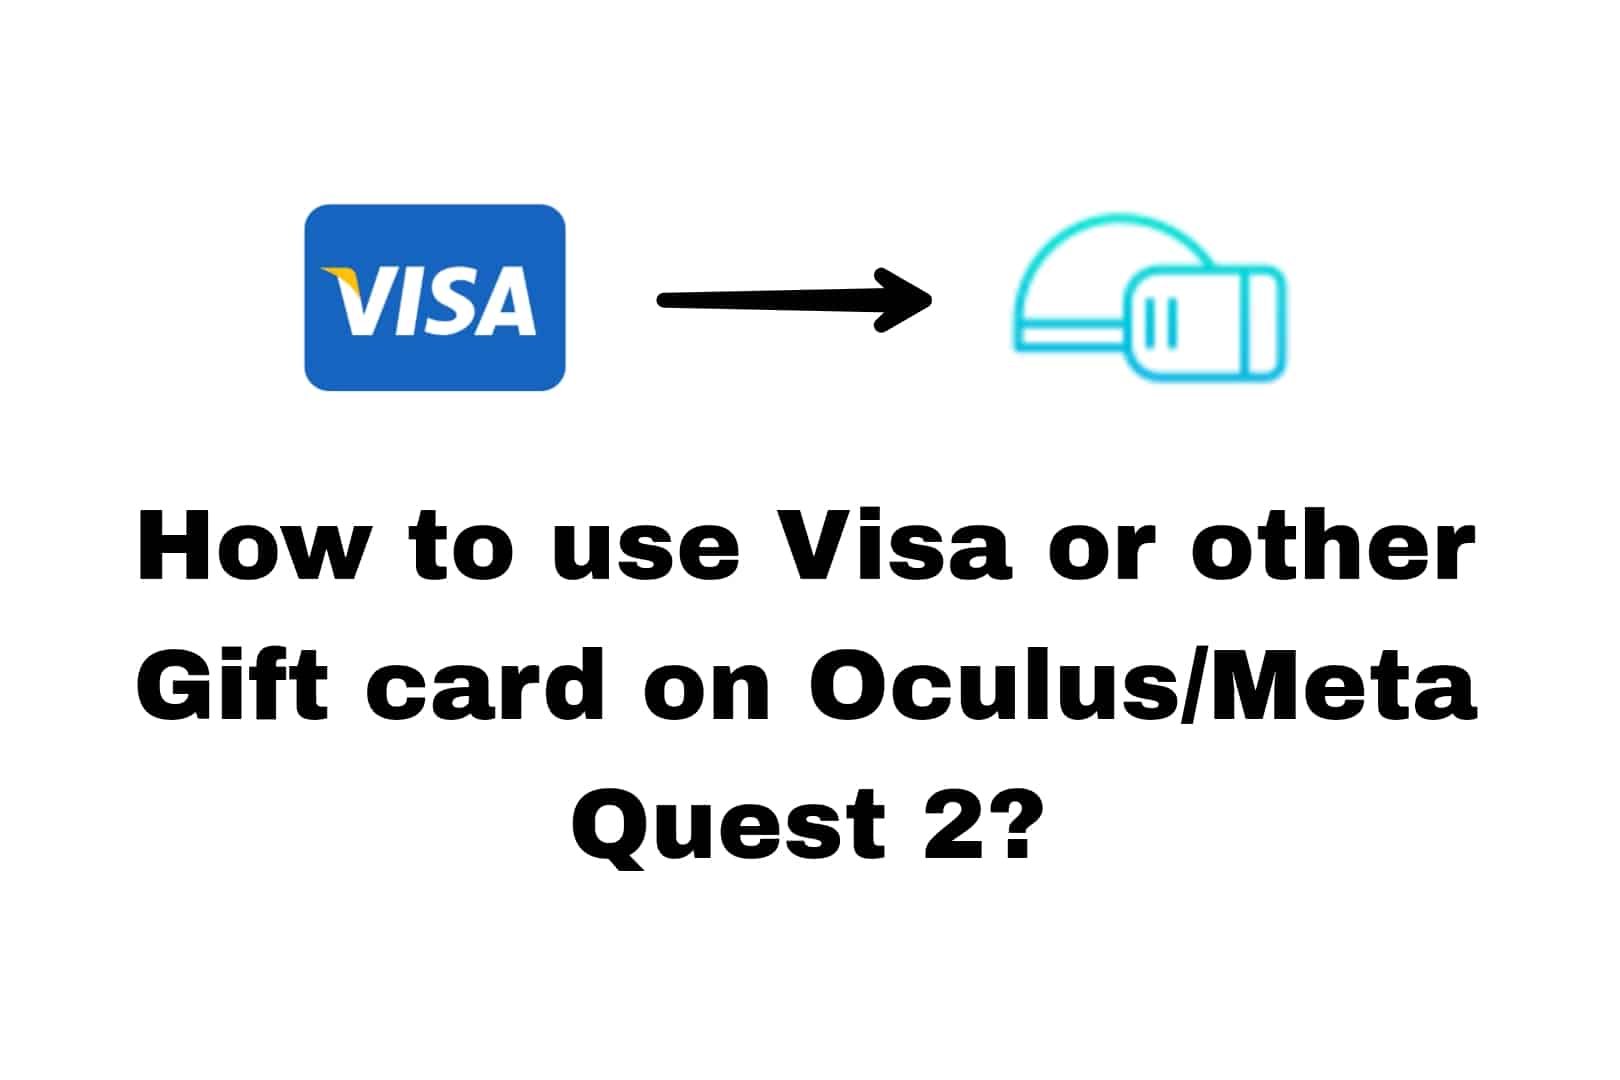 How to use Visa or other Gift card on Oculus or Meta Quest 2